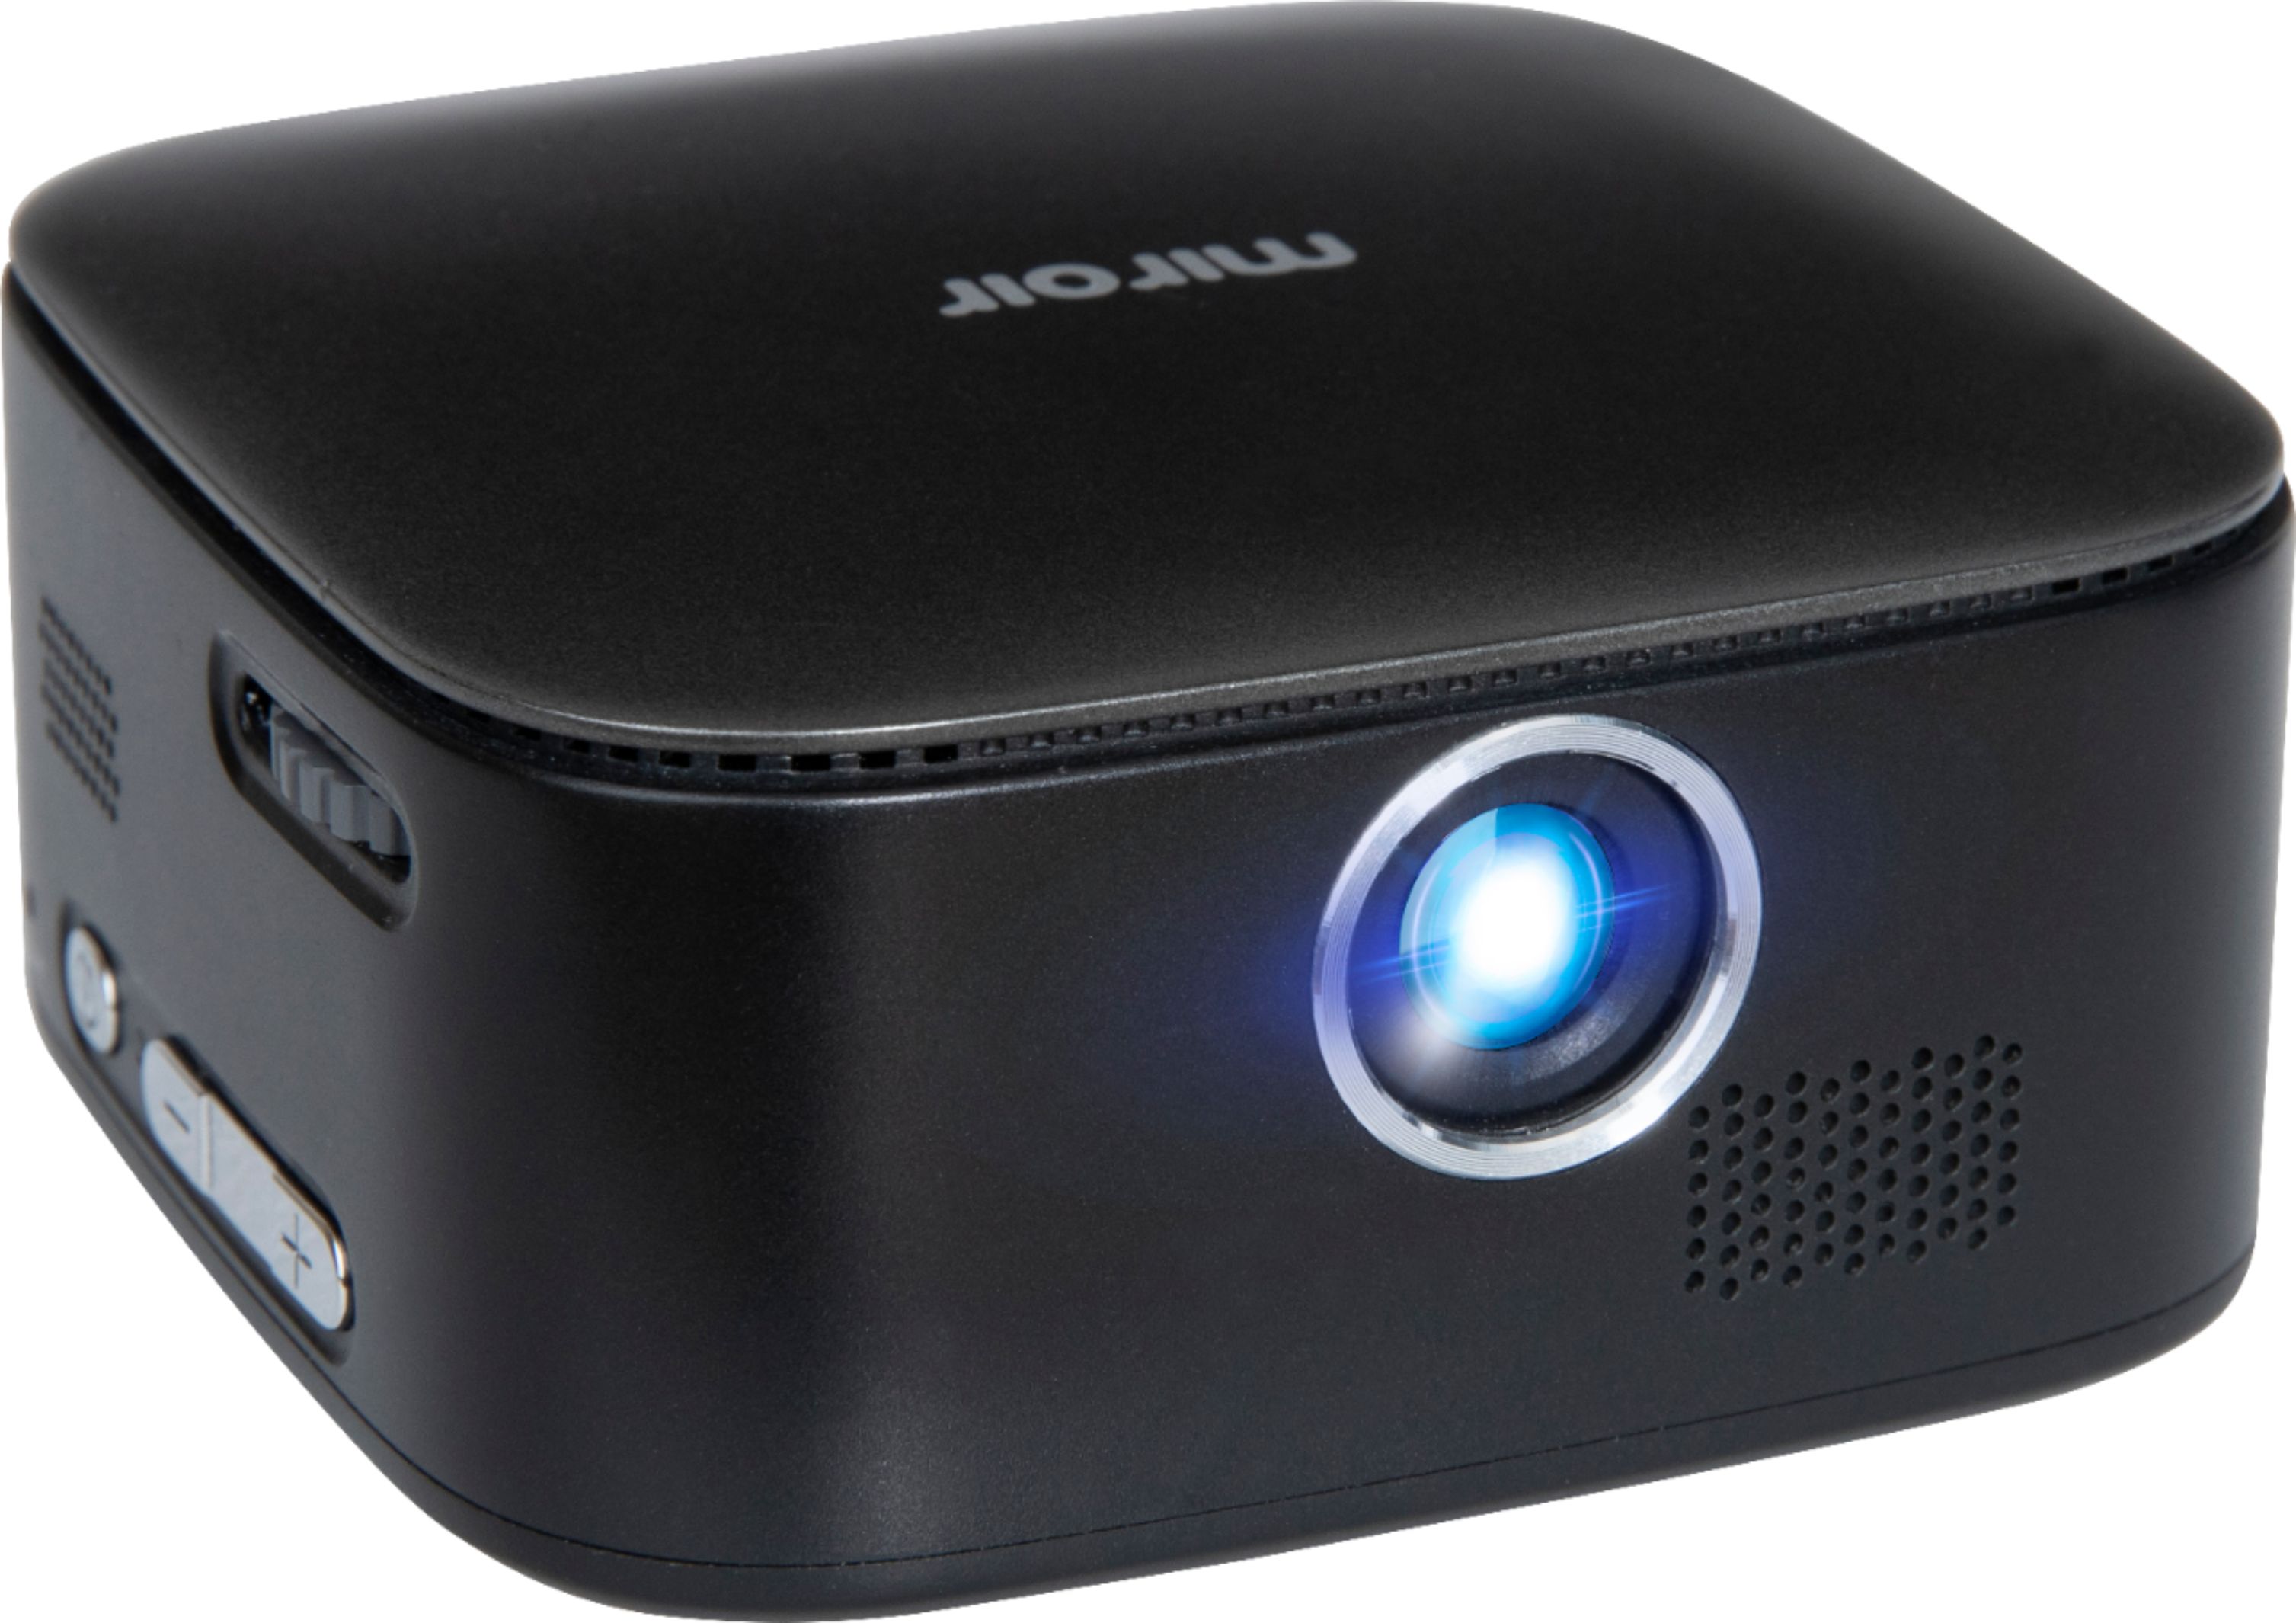 Zoom in on Angle Zoom. Miroir - Element M75 DLP Mini  Projector - Black.